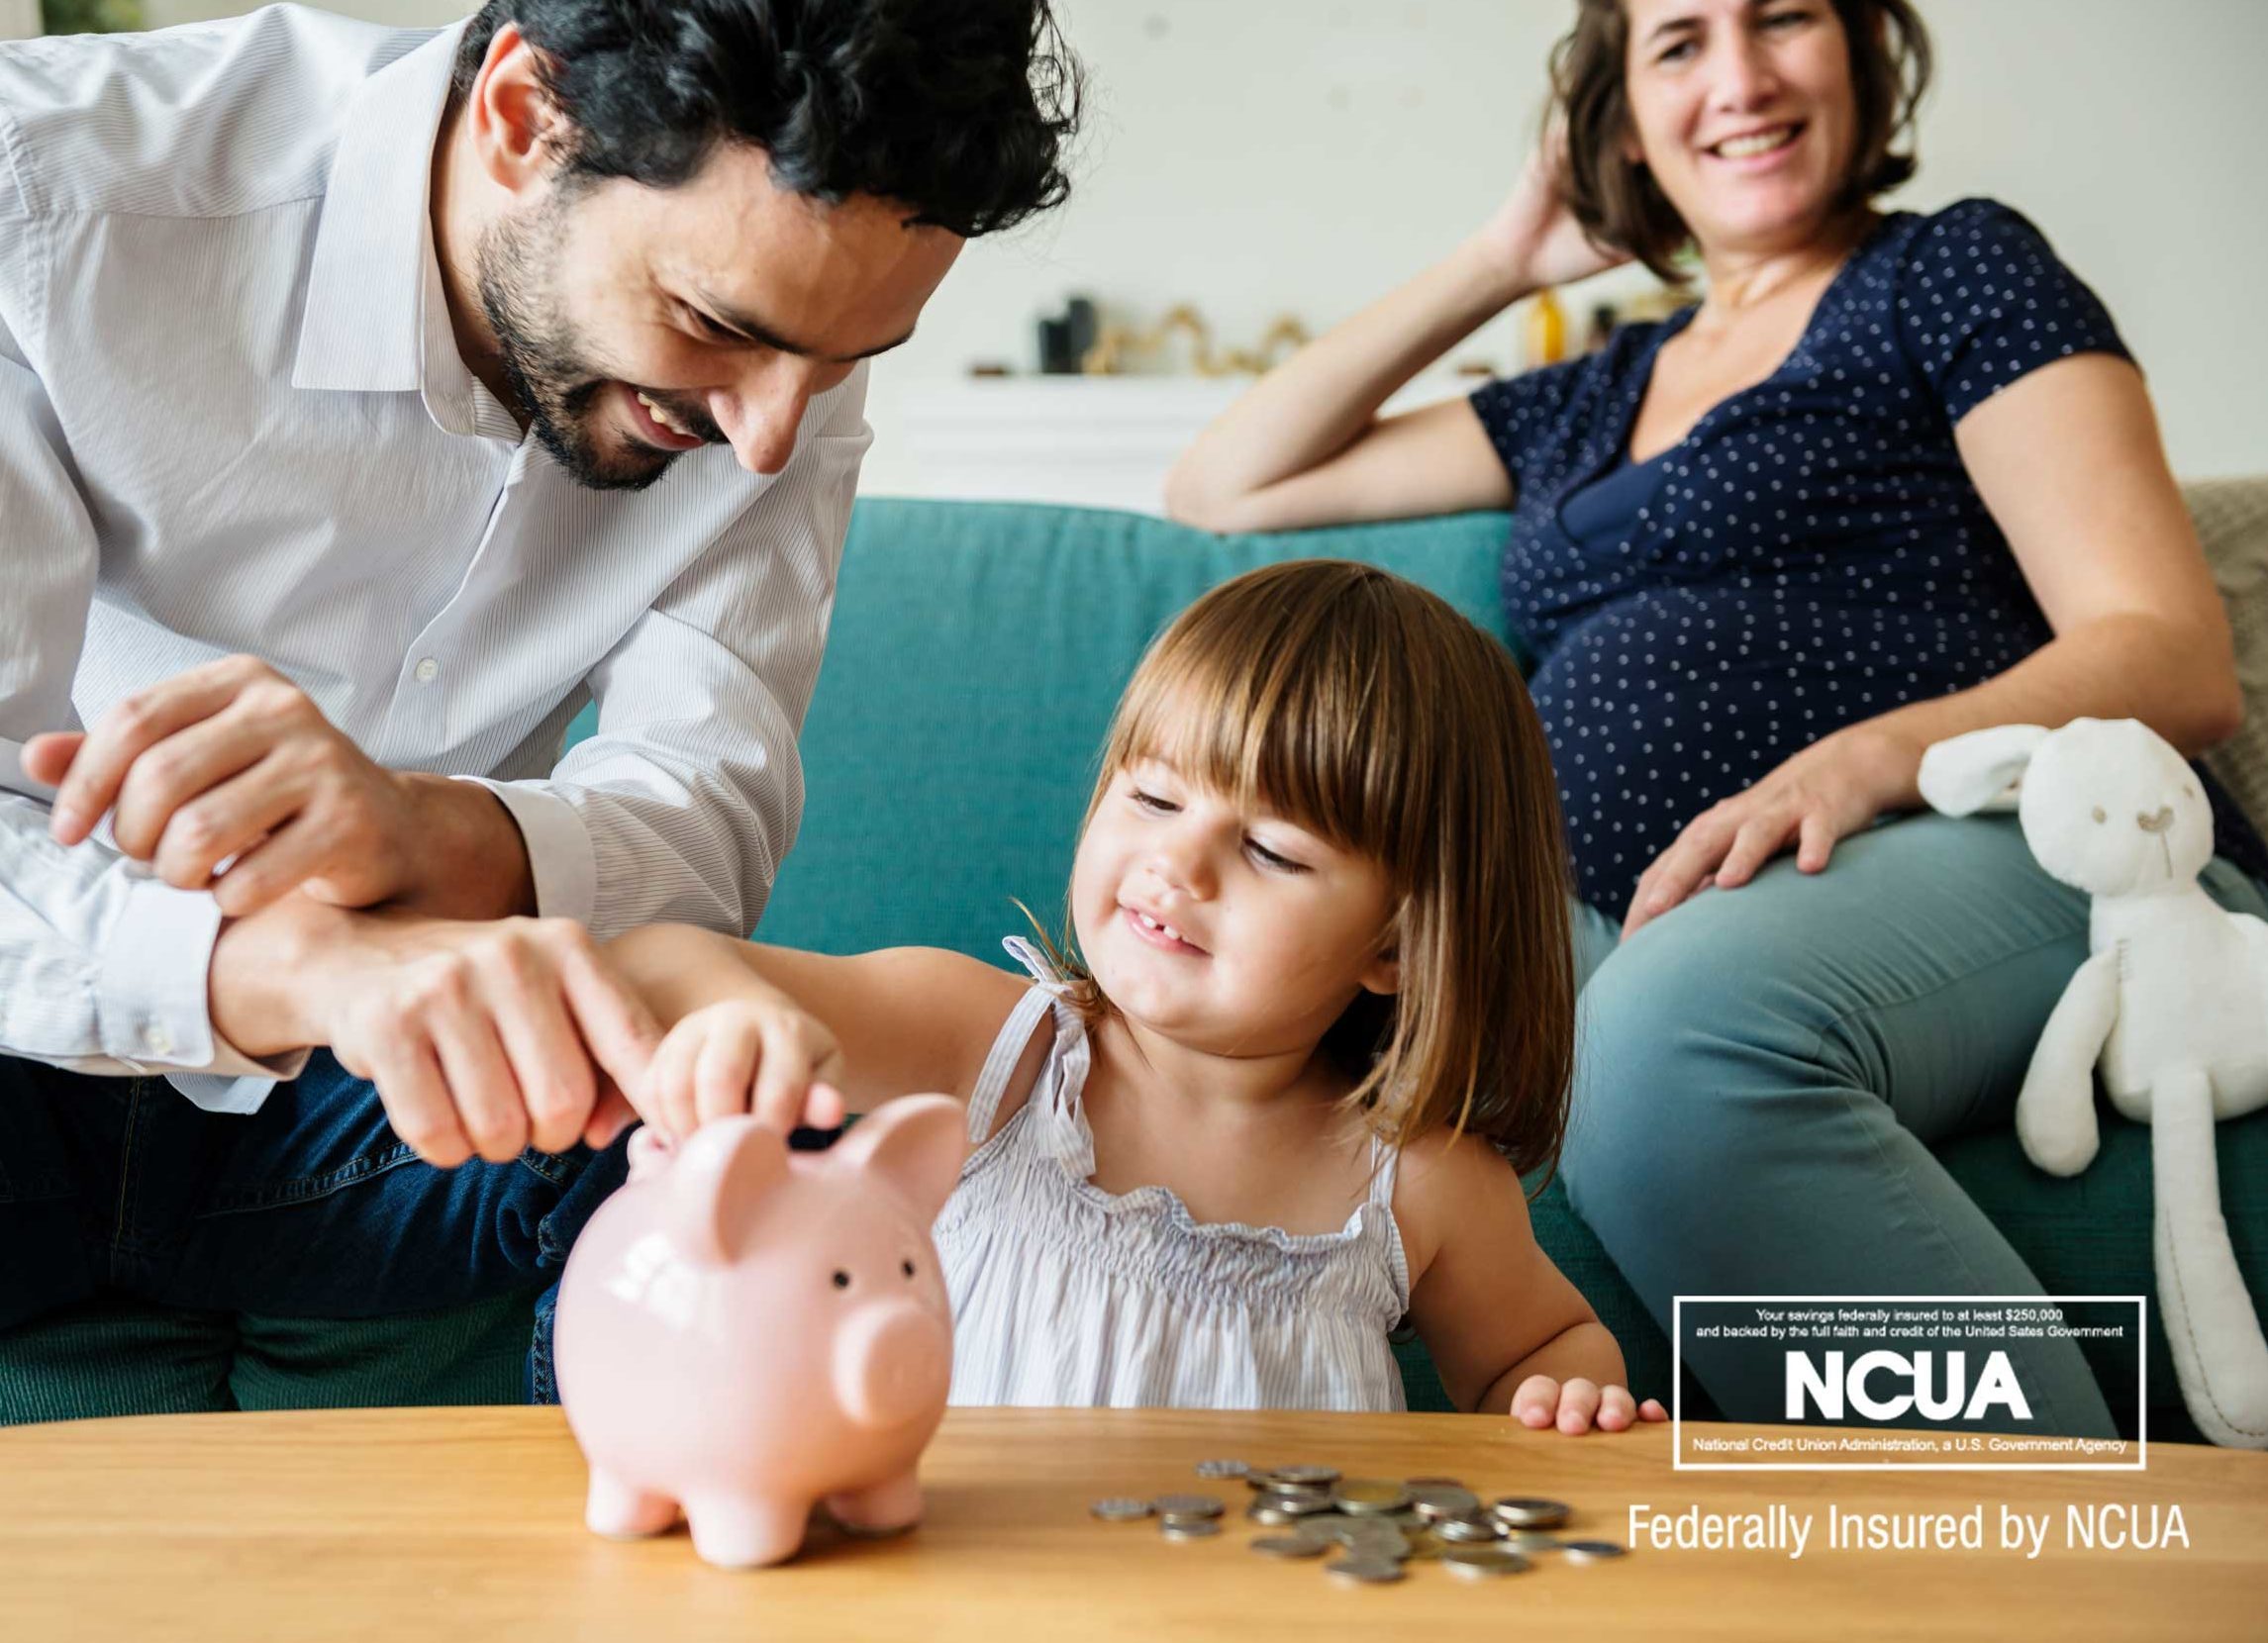 Teaching financial literacy to children is one way to motivate them to save money. The child in this picture looks happy to be dropping money into her piggy bank.